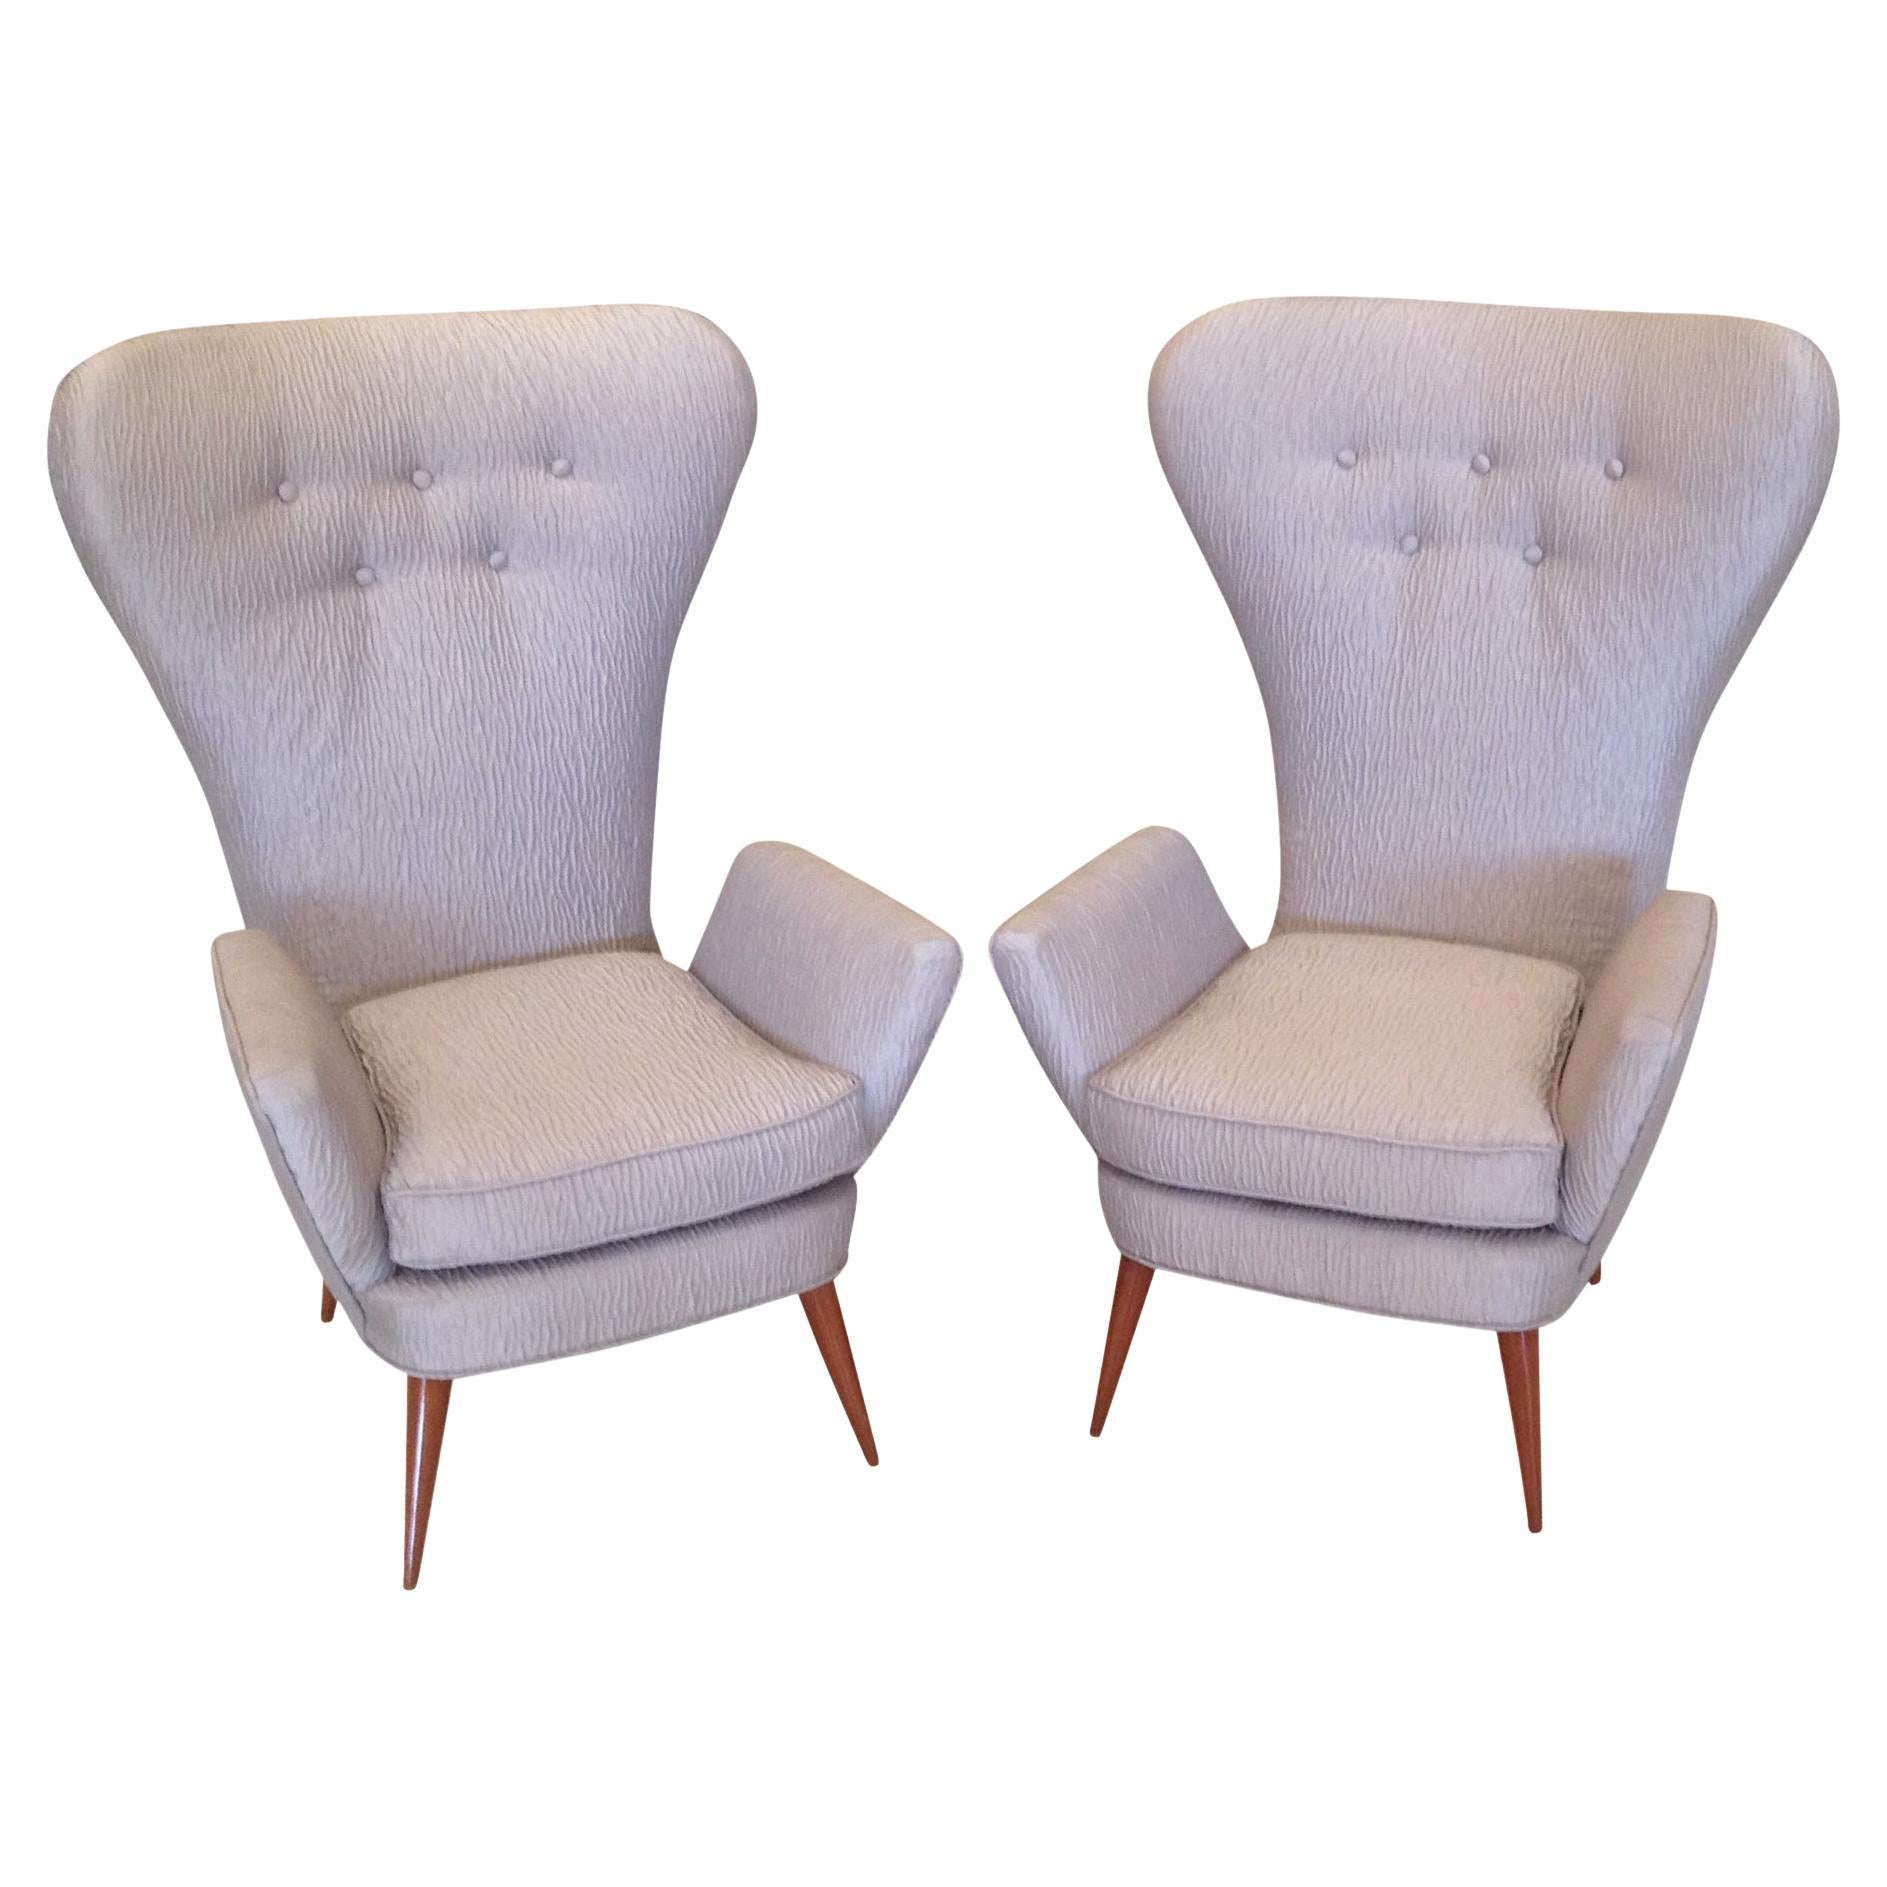 Pair of Italian Modern High Back Chairs For Sale